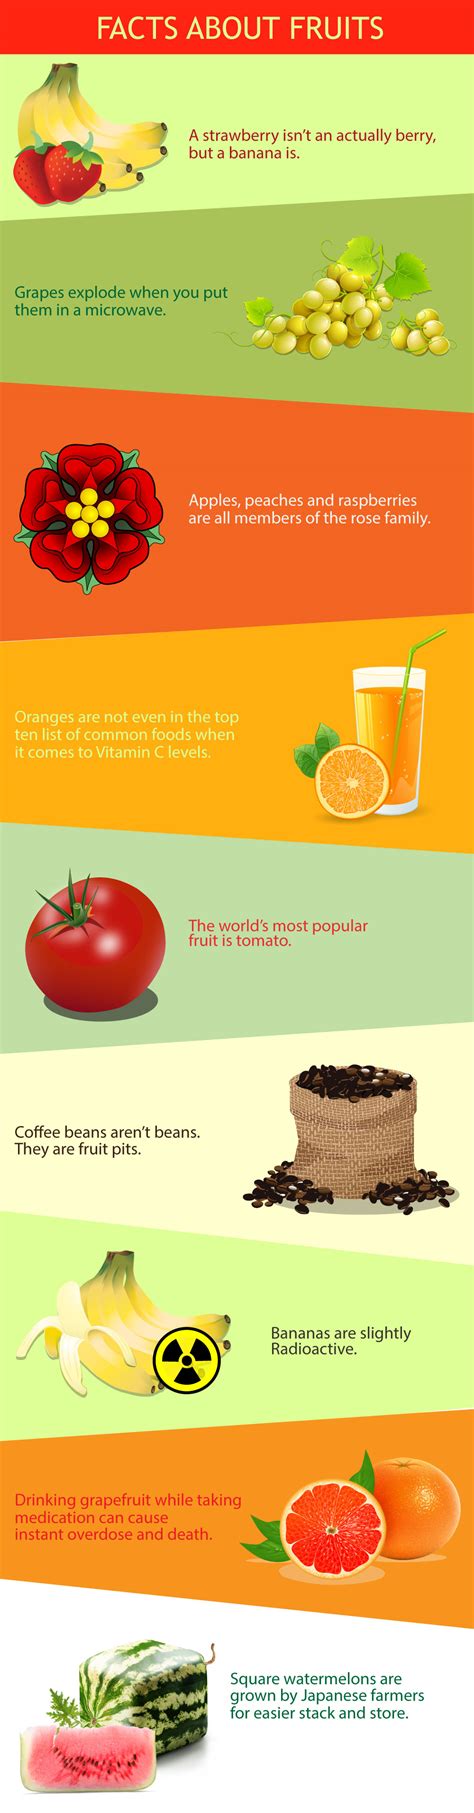 Facts About Fruits Infographic Visualistan